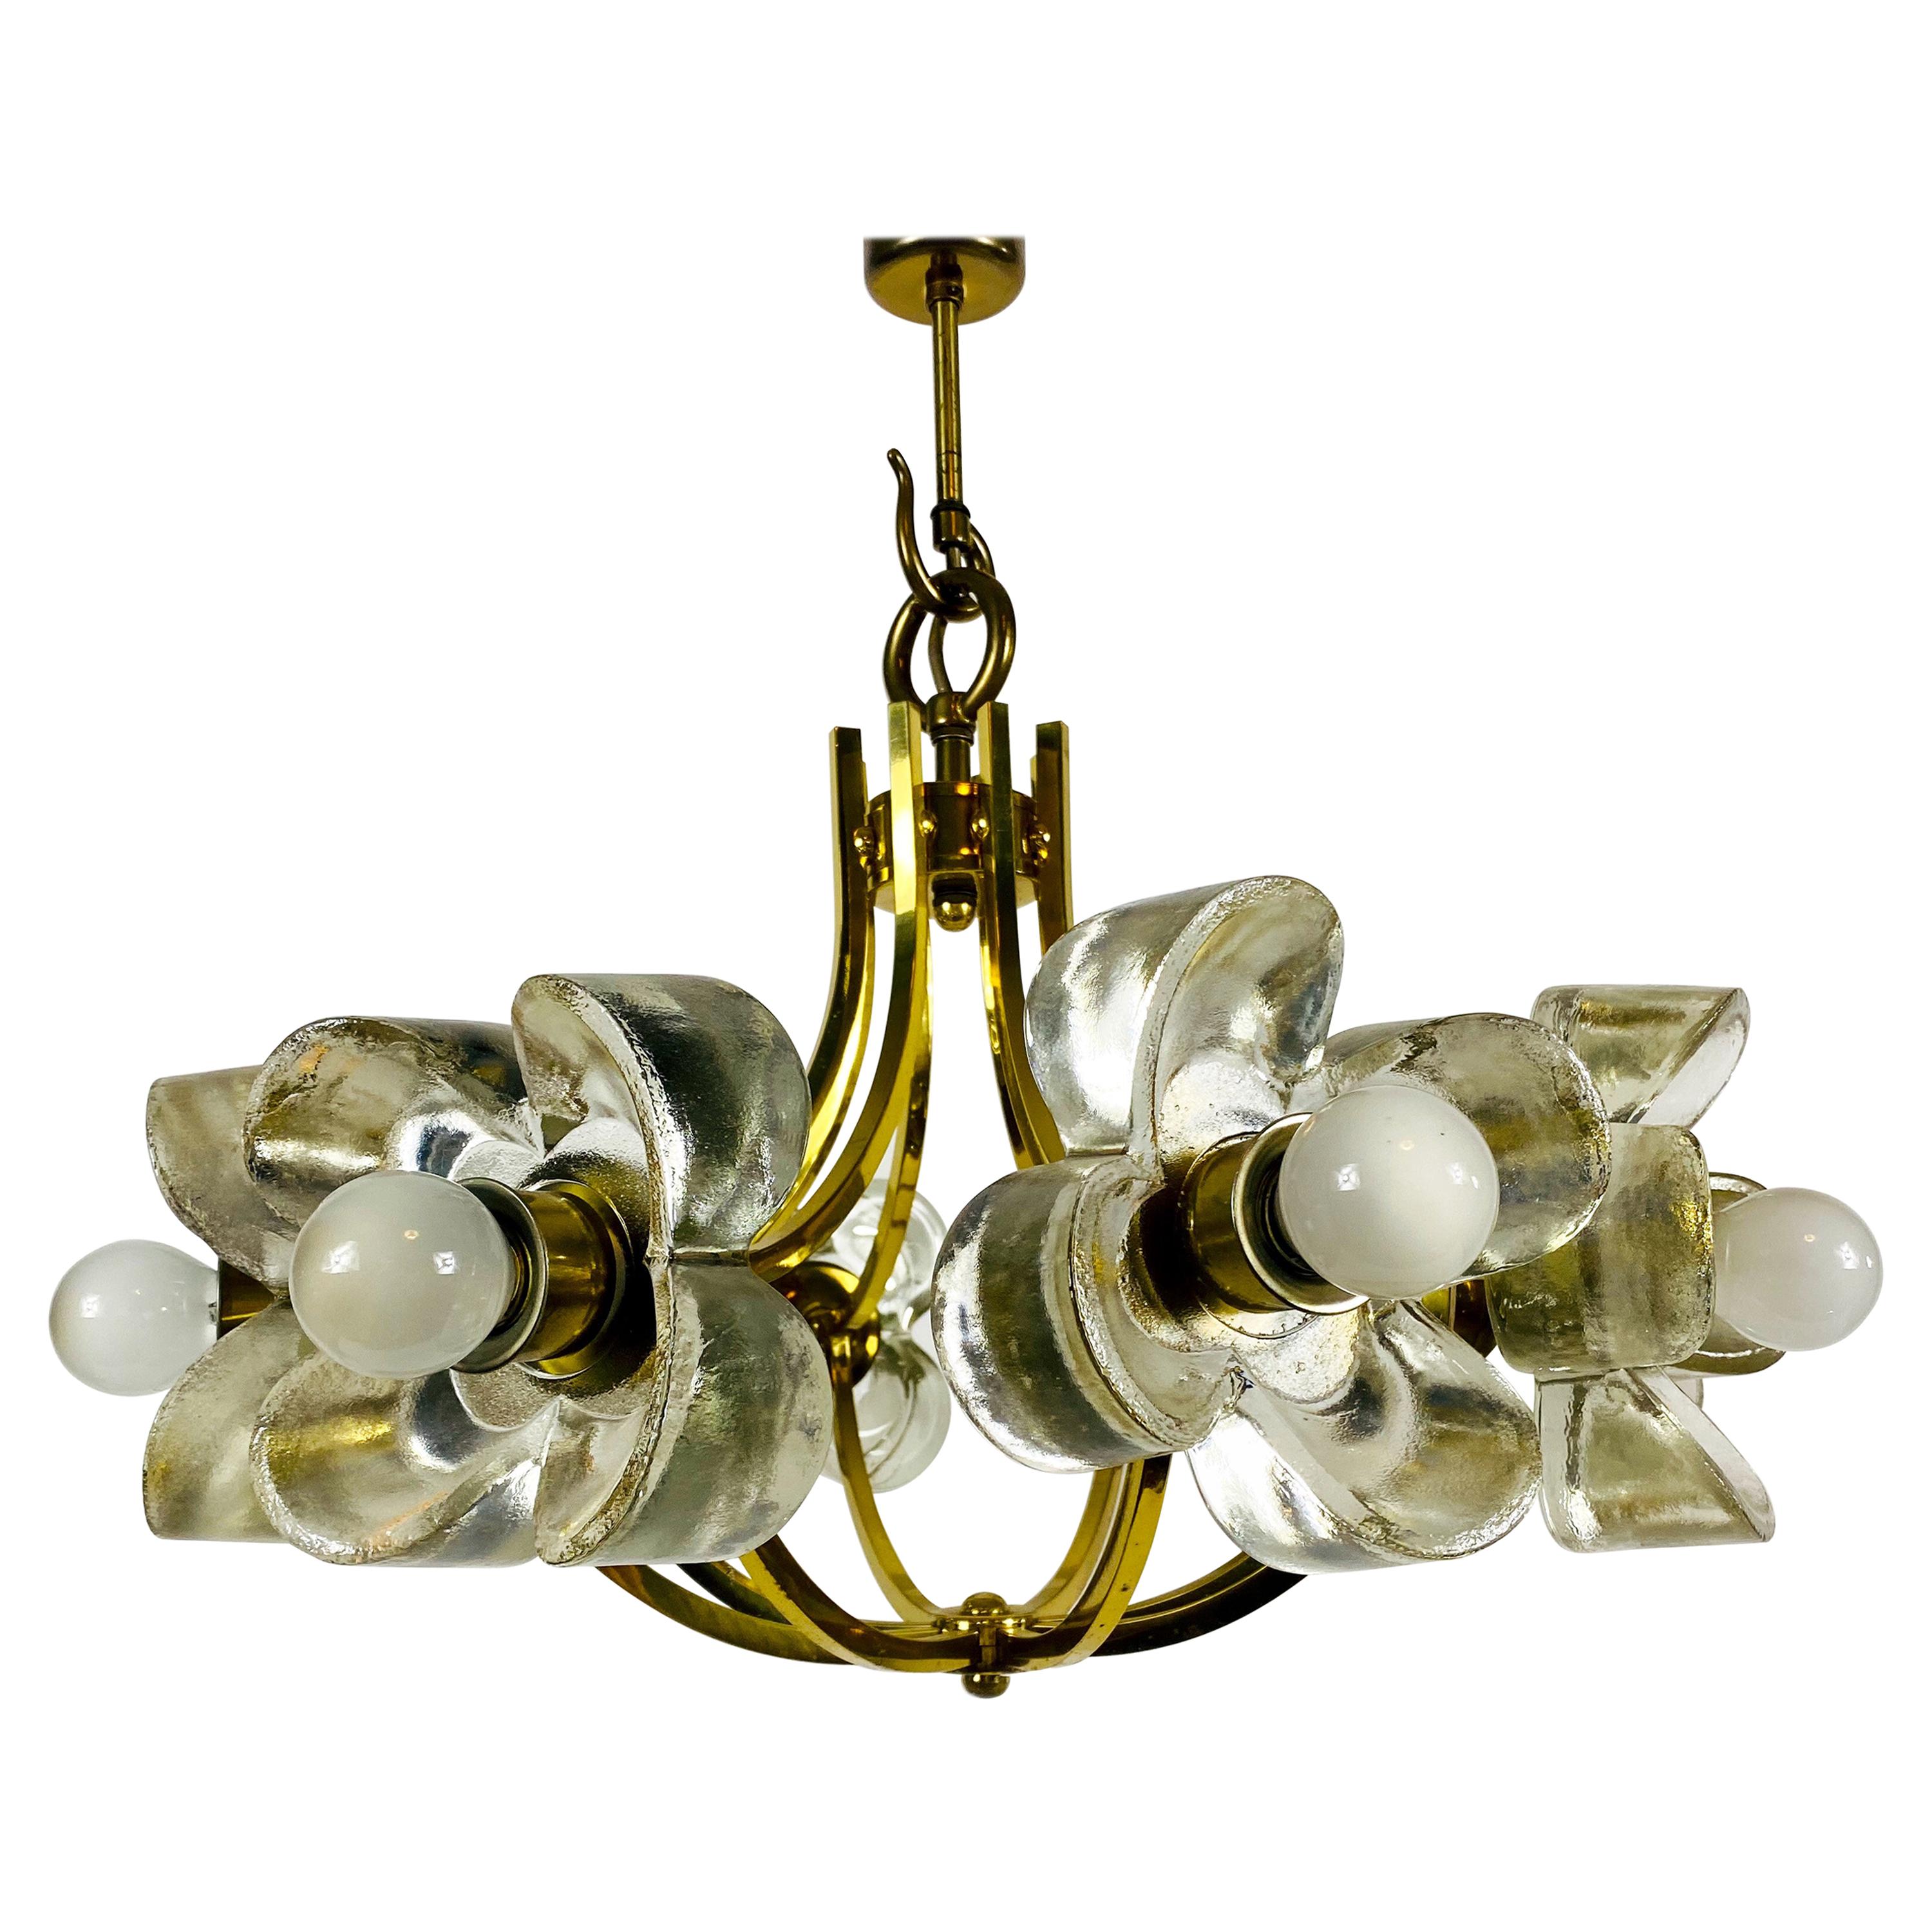 Italian Midcentury Glass and Brass 8-Arm Chandelier Mazzega Attributed, 1960s